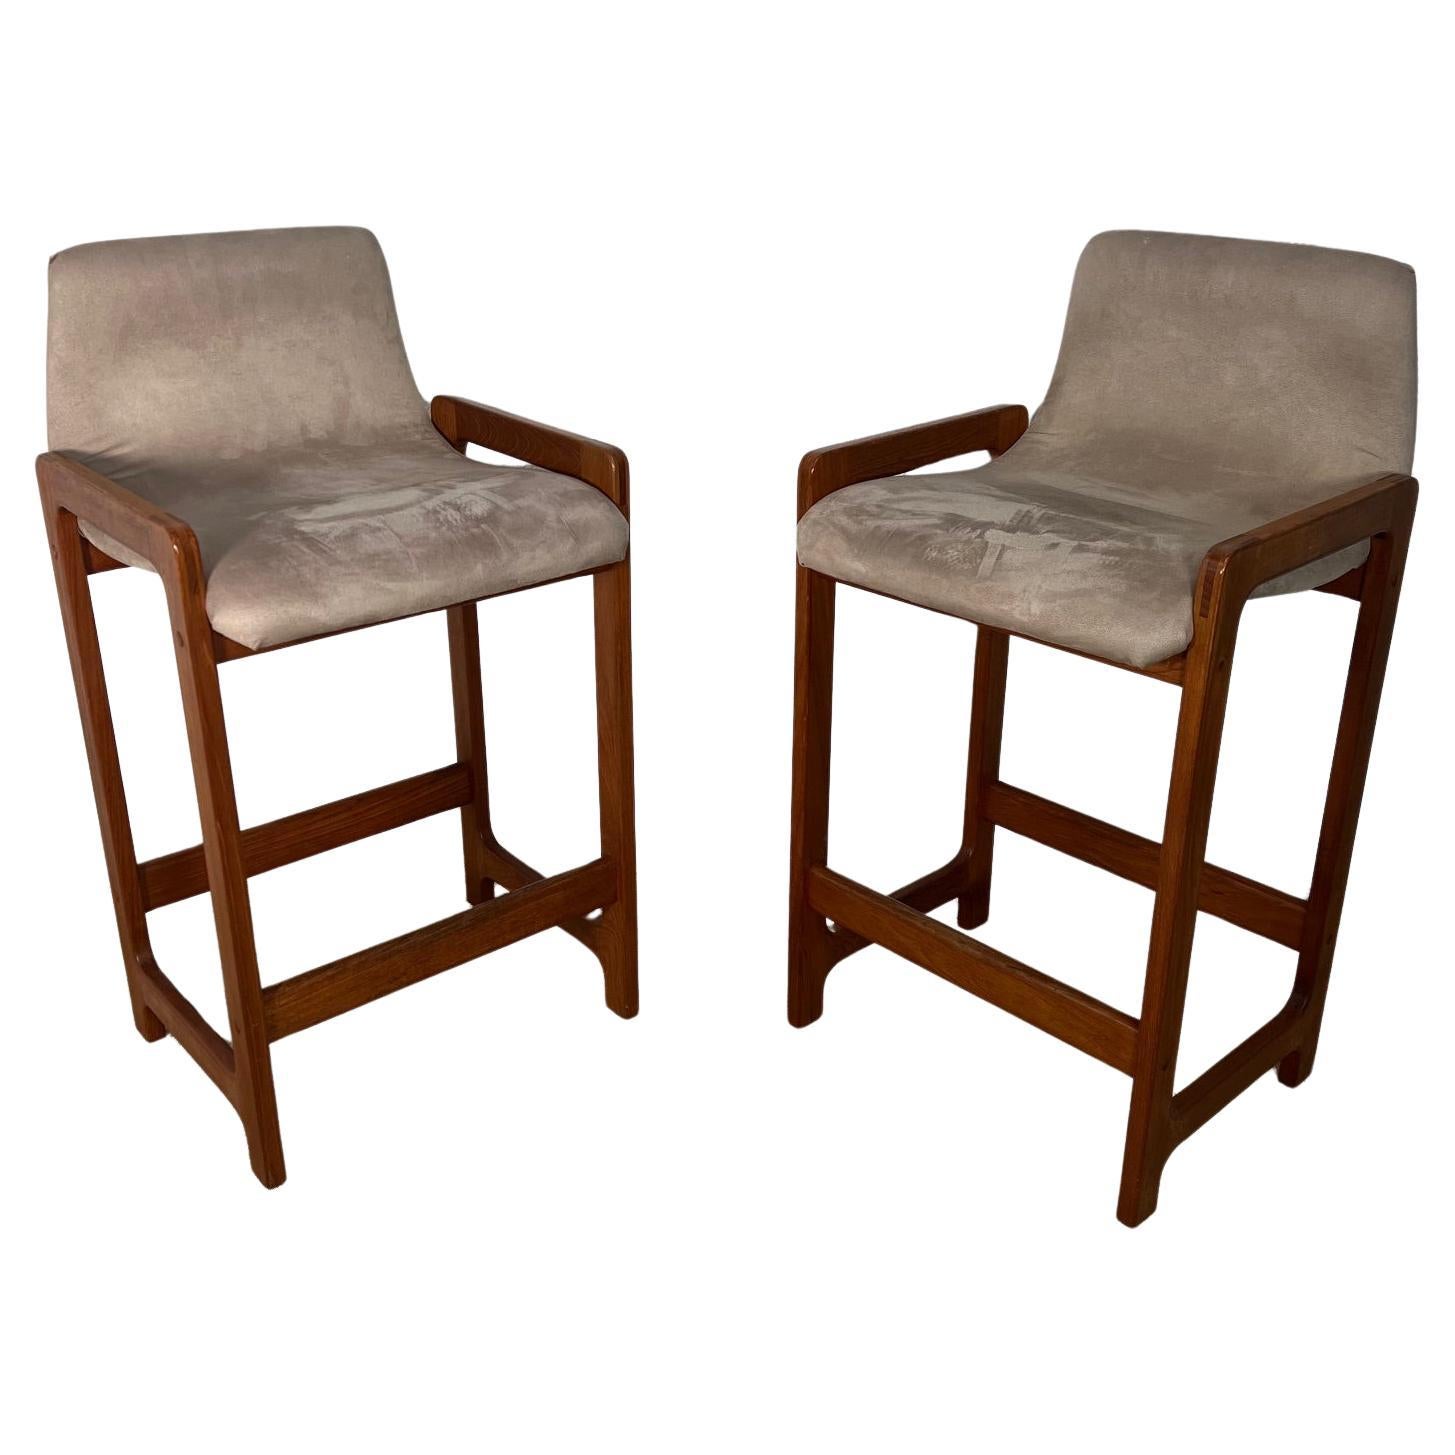 Pair Of Mid Century Modern Teak Bar Stools By D-Scan Counter Height For Sale